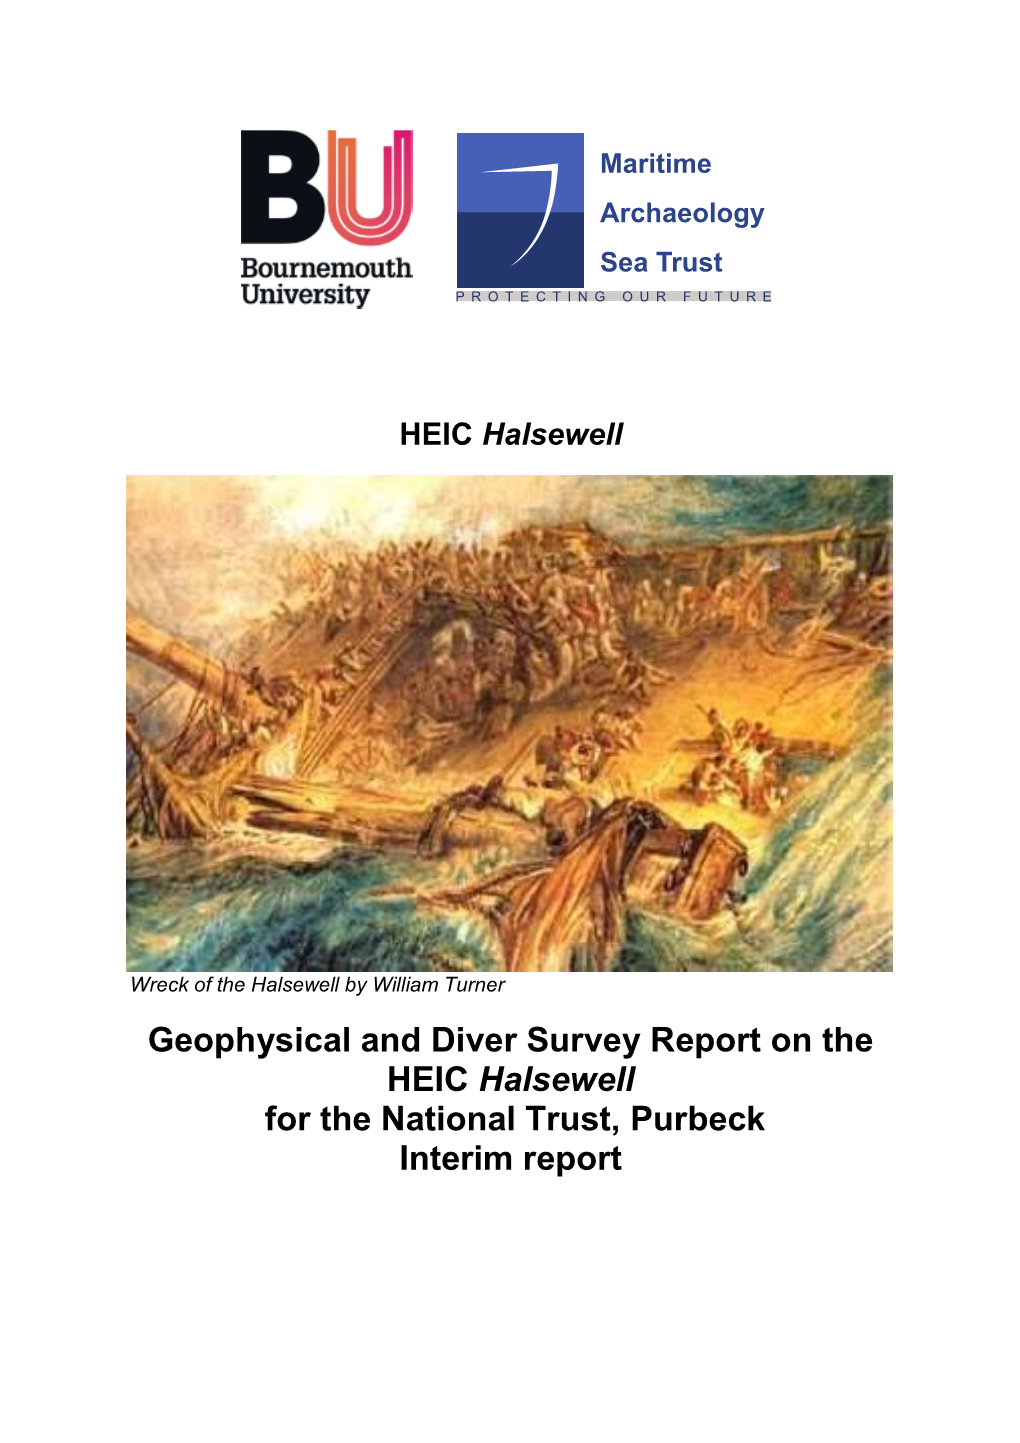 Geophysical and Diver Survey Report on the HEIC Halsewell for the National Trust, Purbeck Interim Report